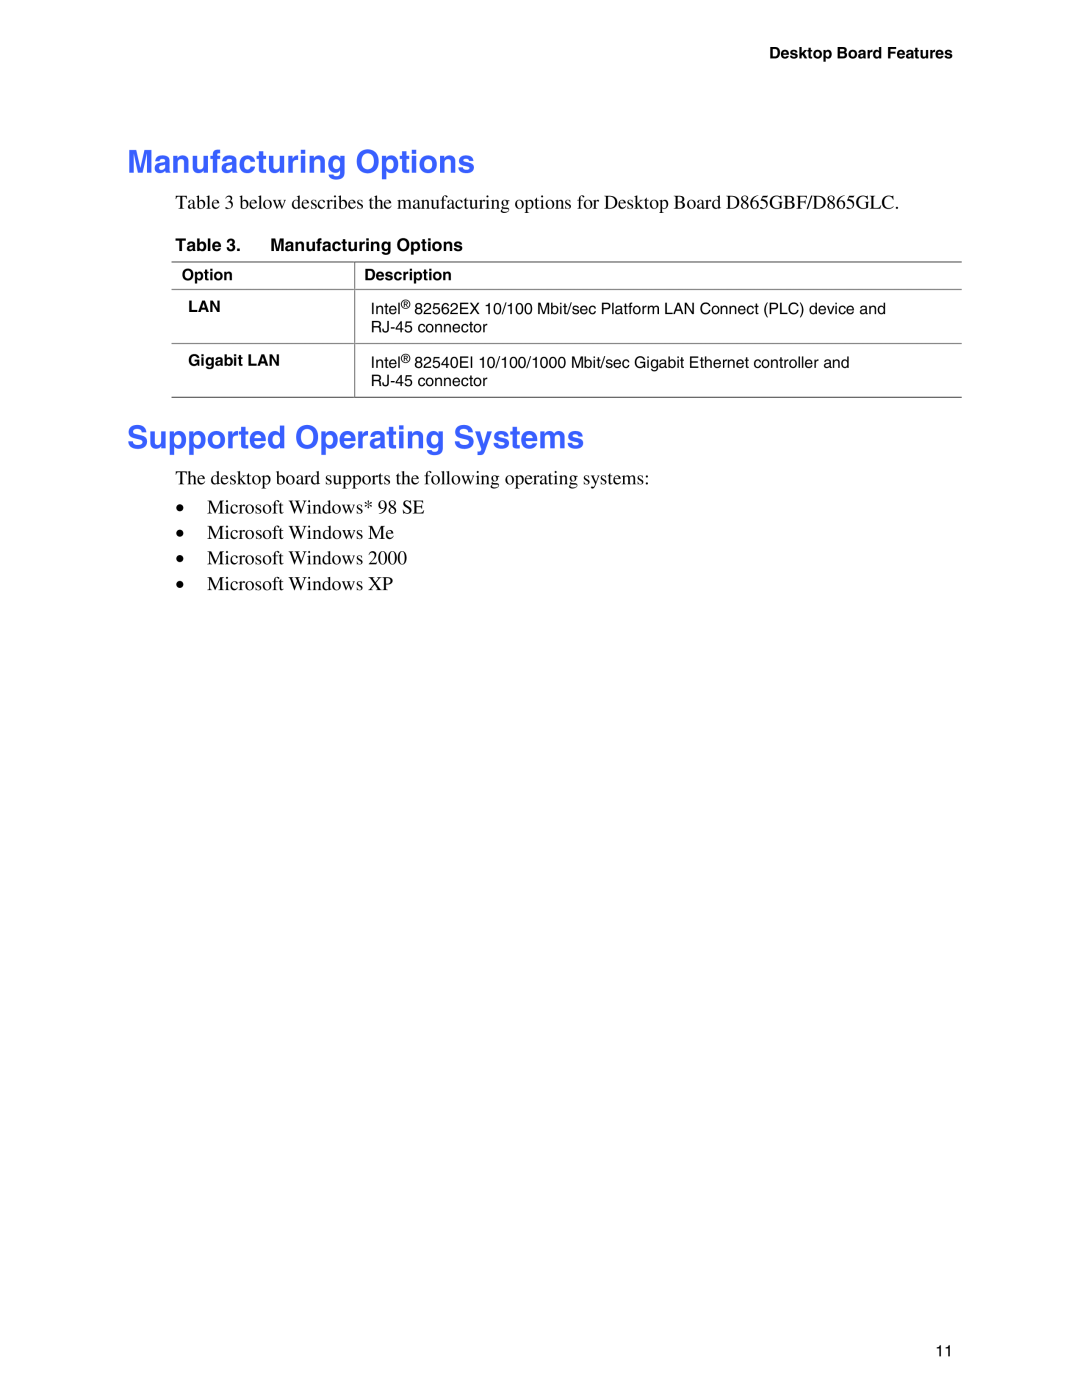 Intel D865GBF, D865GLC manual Manufacturing Options, Supported Operating Systems 